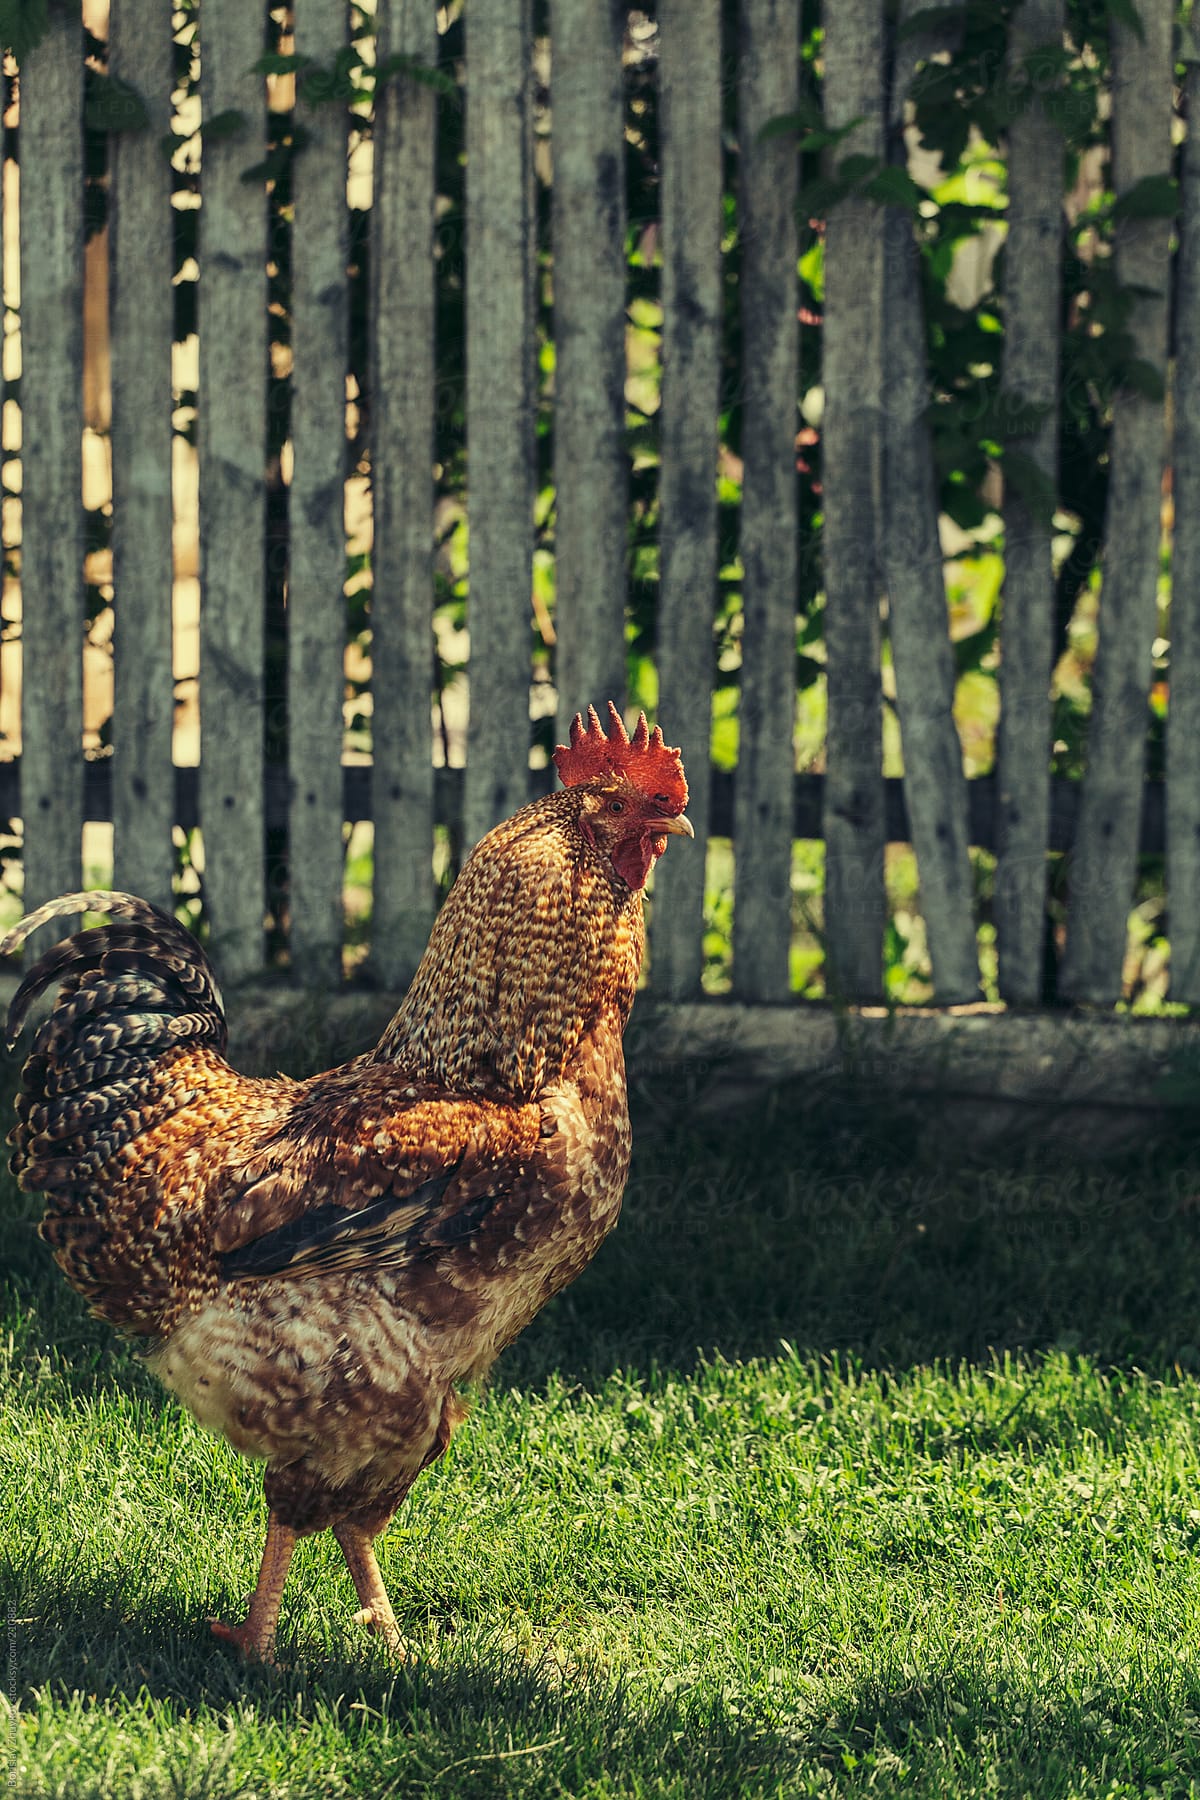 Rooster roams free on green grass in front of wooden wall